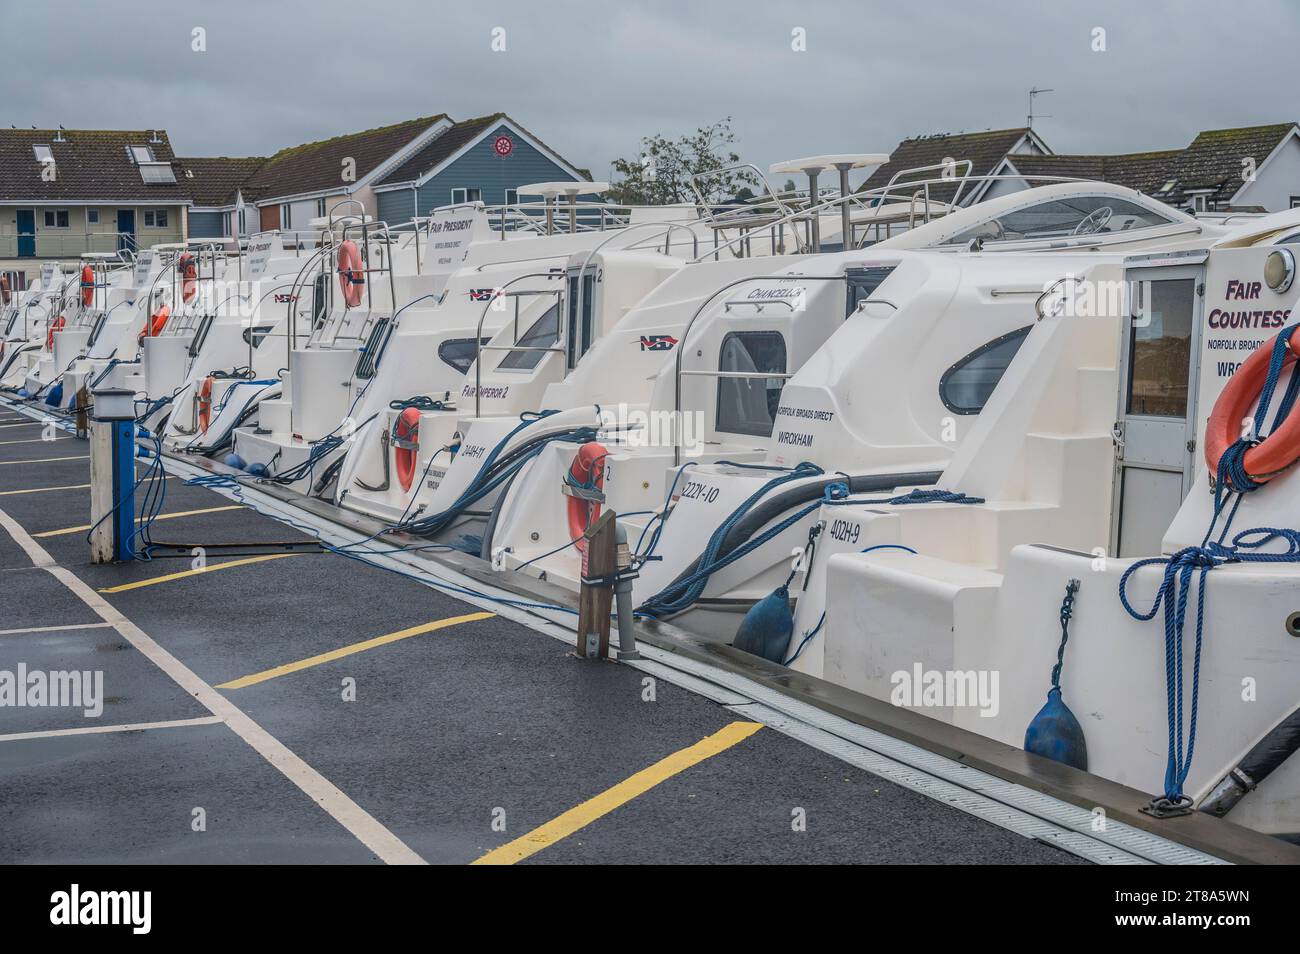 The image is of pleasure boat cruiser boats for hire at the Wroxham small boat marina in the Norfolk town of Wroxham on the Norfolk Broads Stock Photo